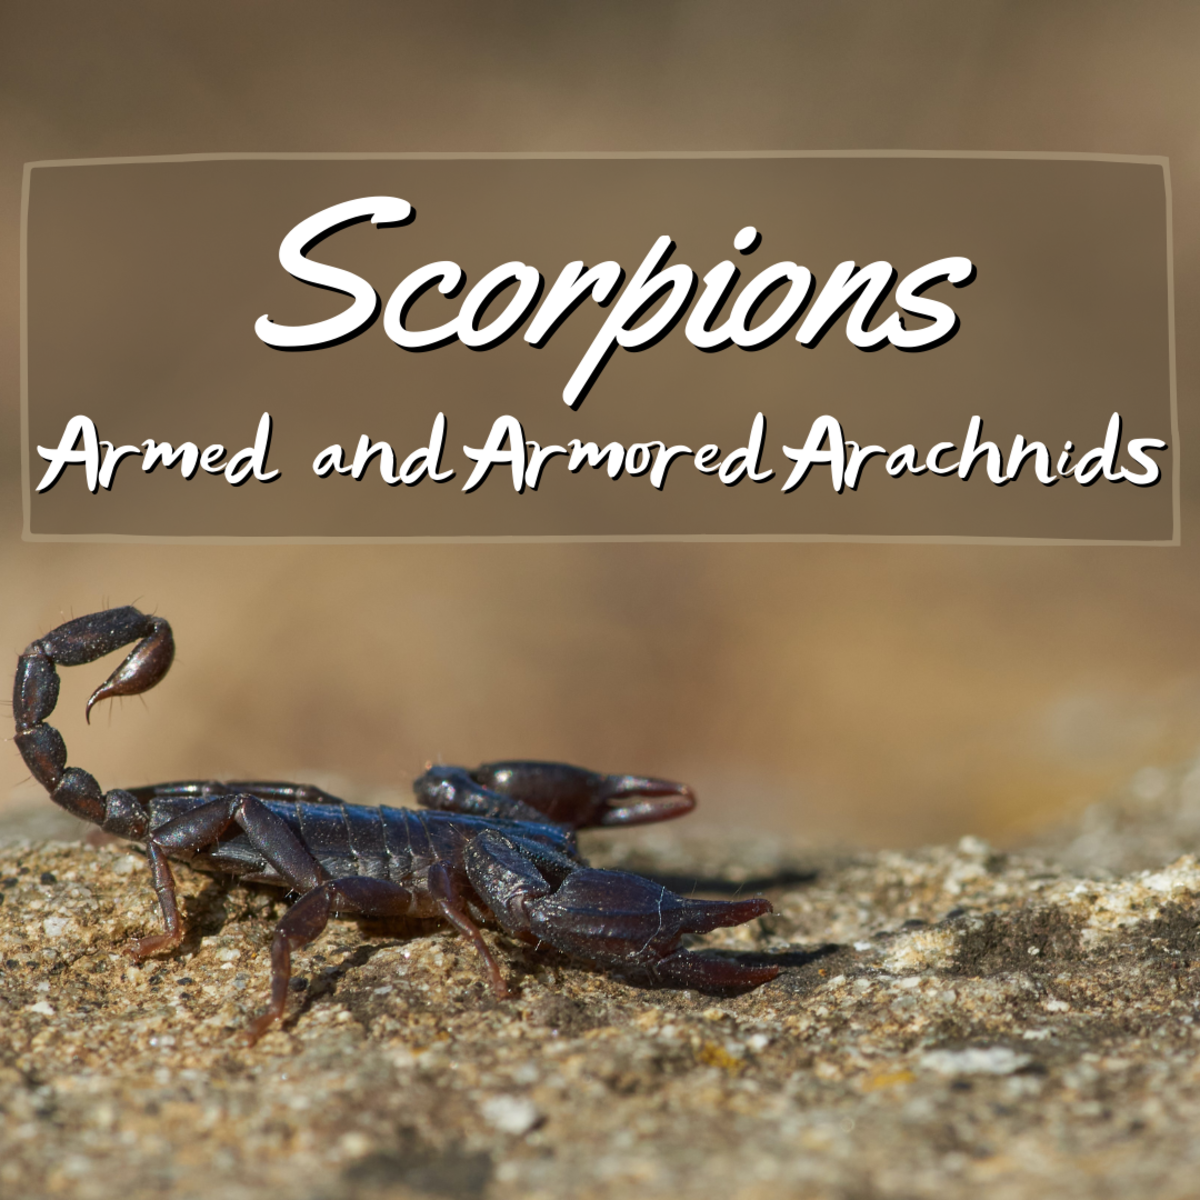 Read on to learn interesting facts and info on scorpions, one of nature's most resilient and dangerous creatures. 